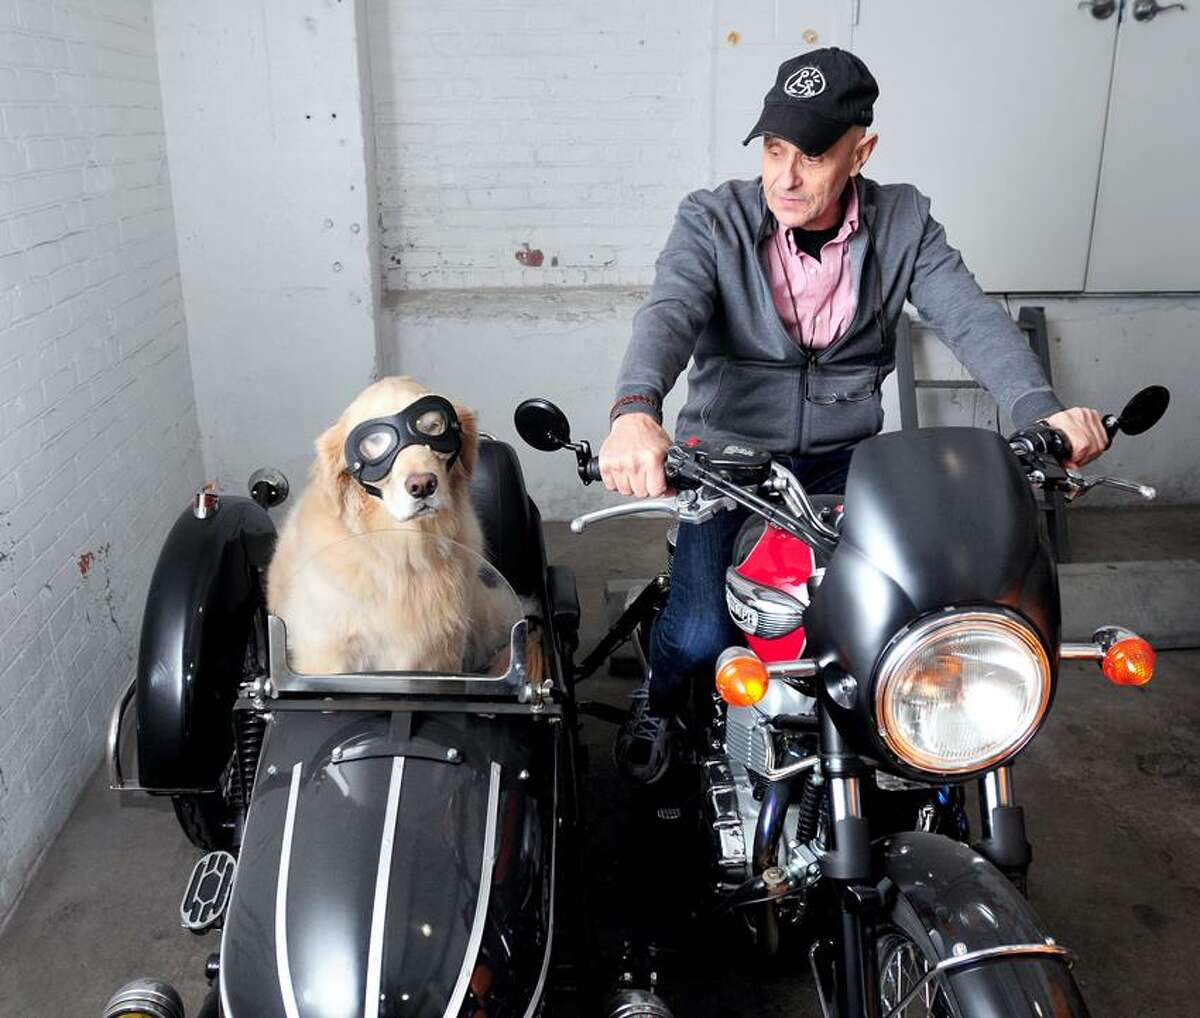 Danny Klein is photographed with his therapy dog, Remy, in a sidecar in the garage of their apartment building in New Haven on 2/14/2013.Photo by Arnold Gold/New Haven Register AG0483B